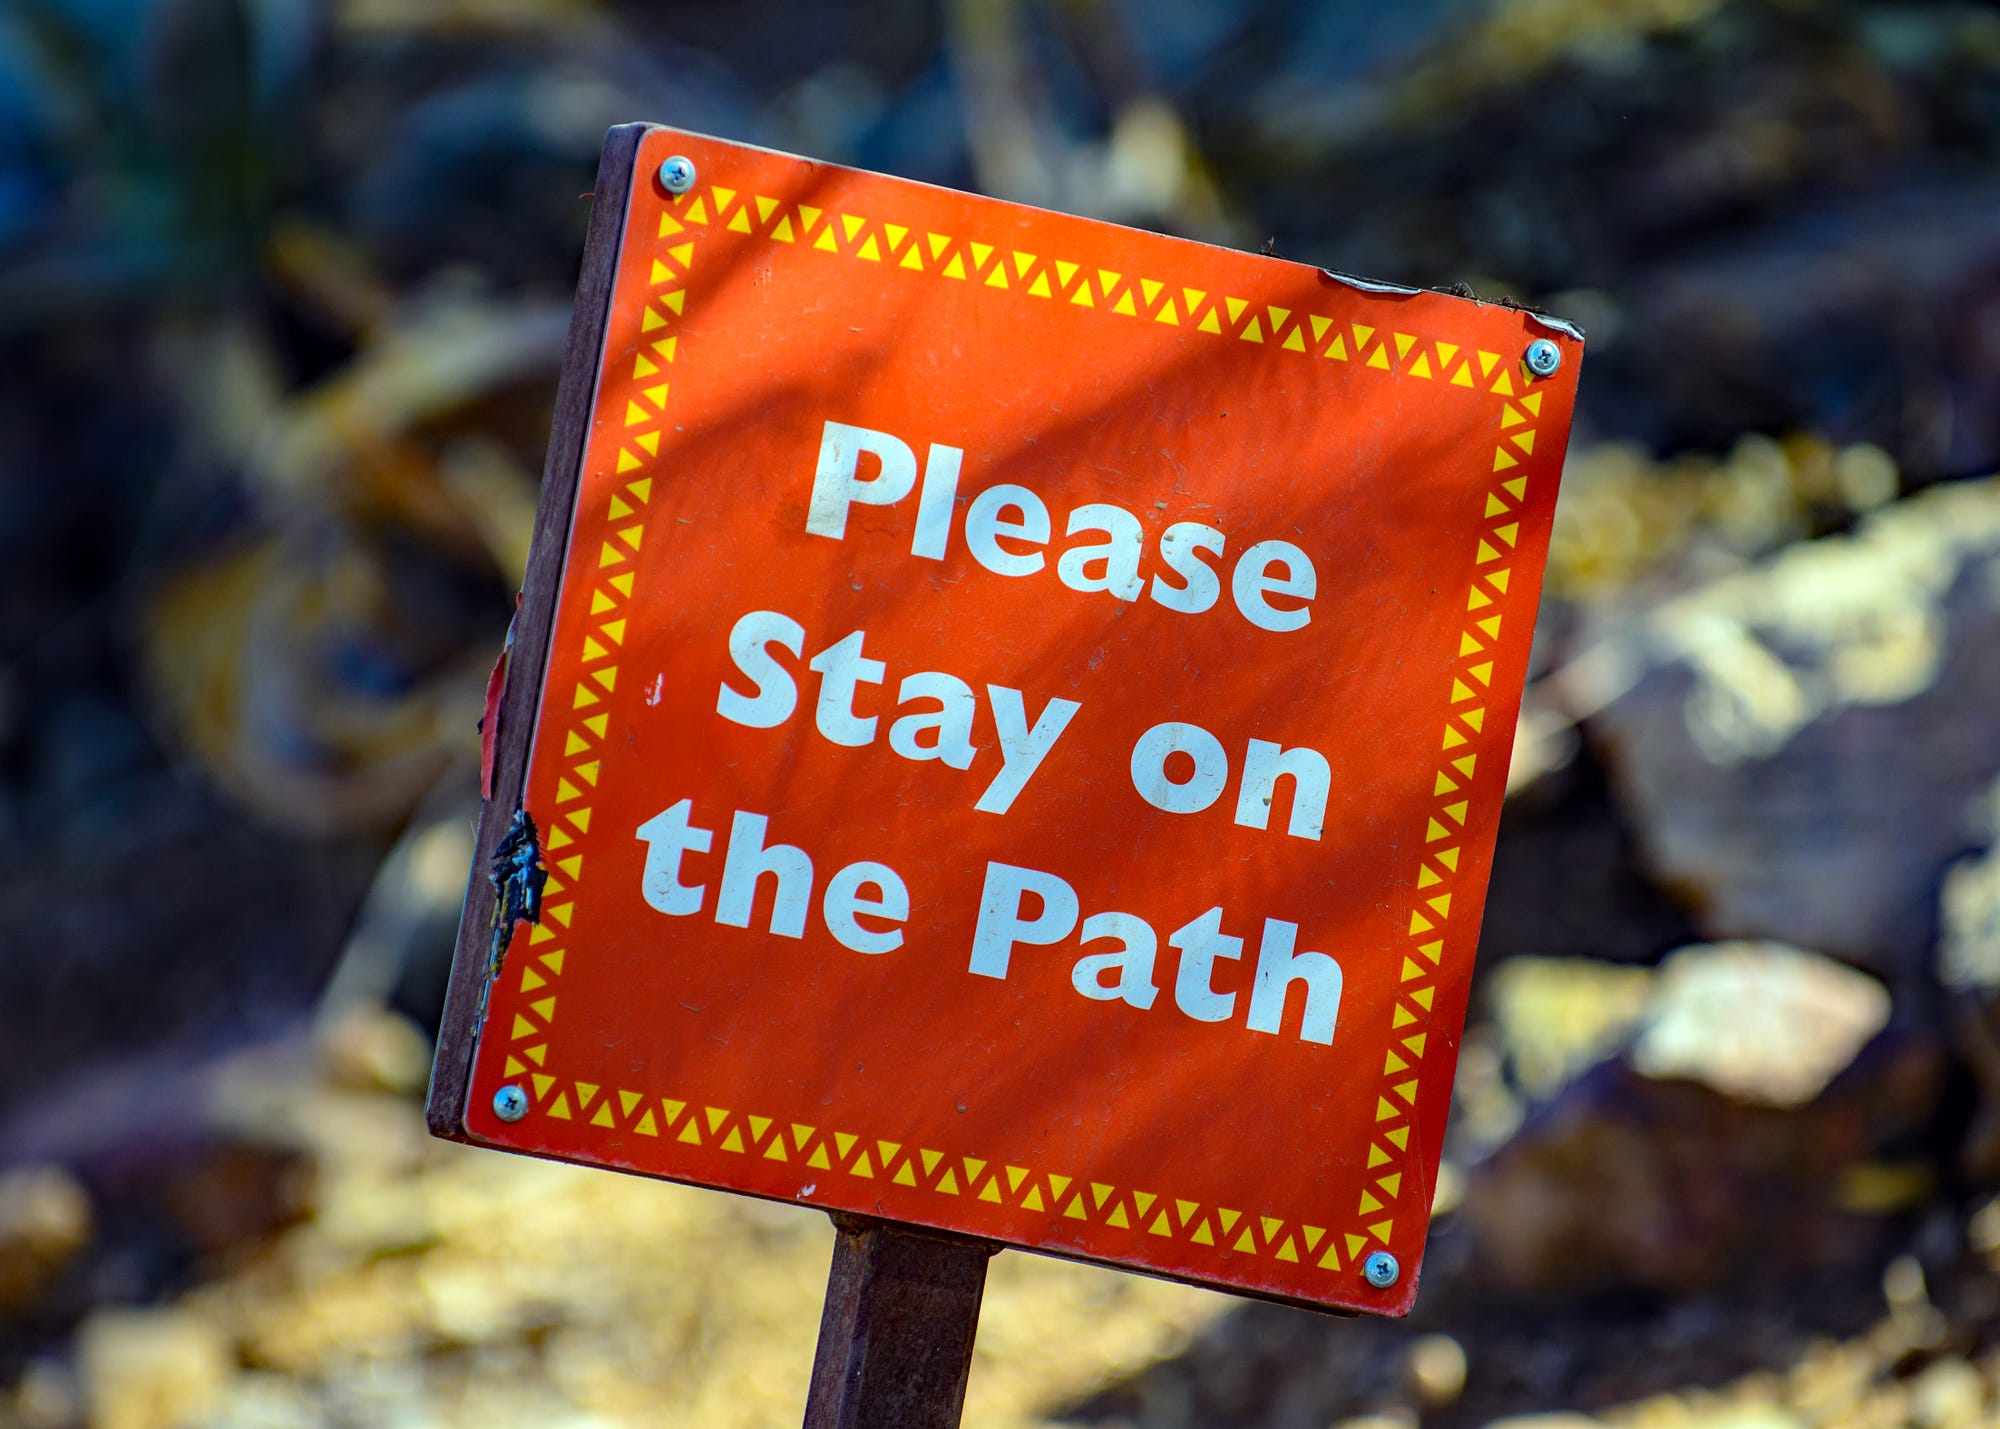 orange sign that reads “Please Stay on the Path”